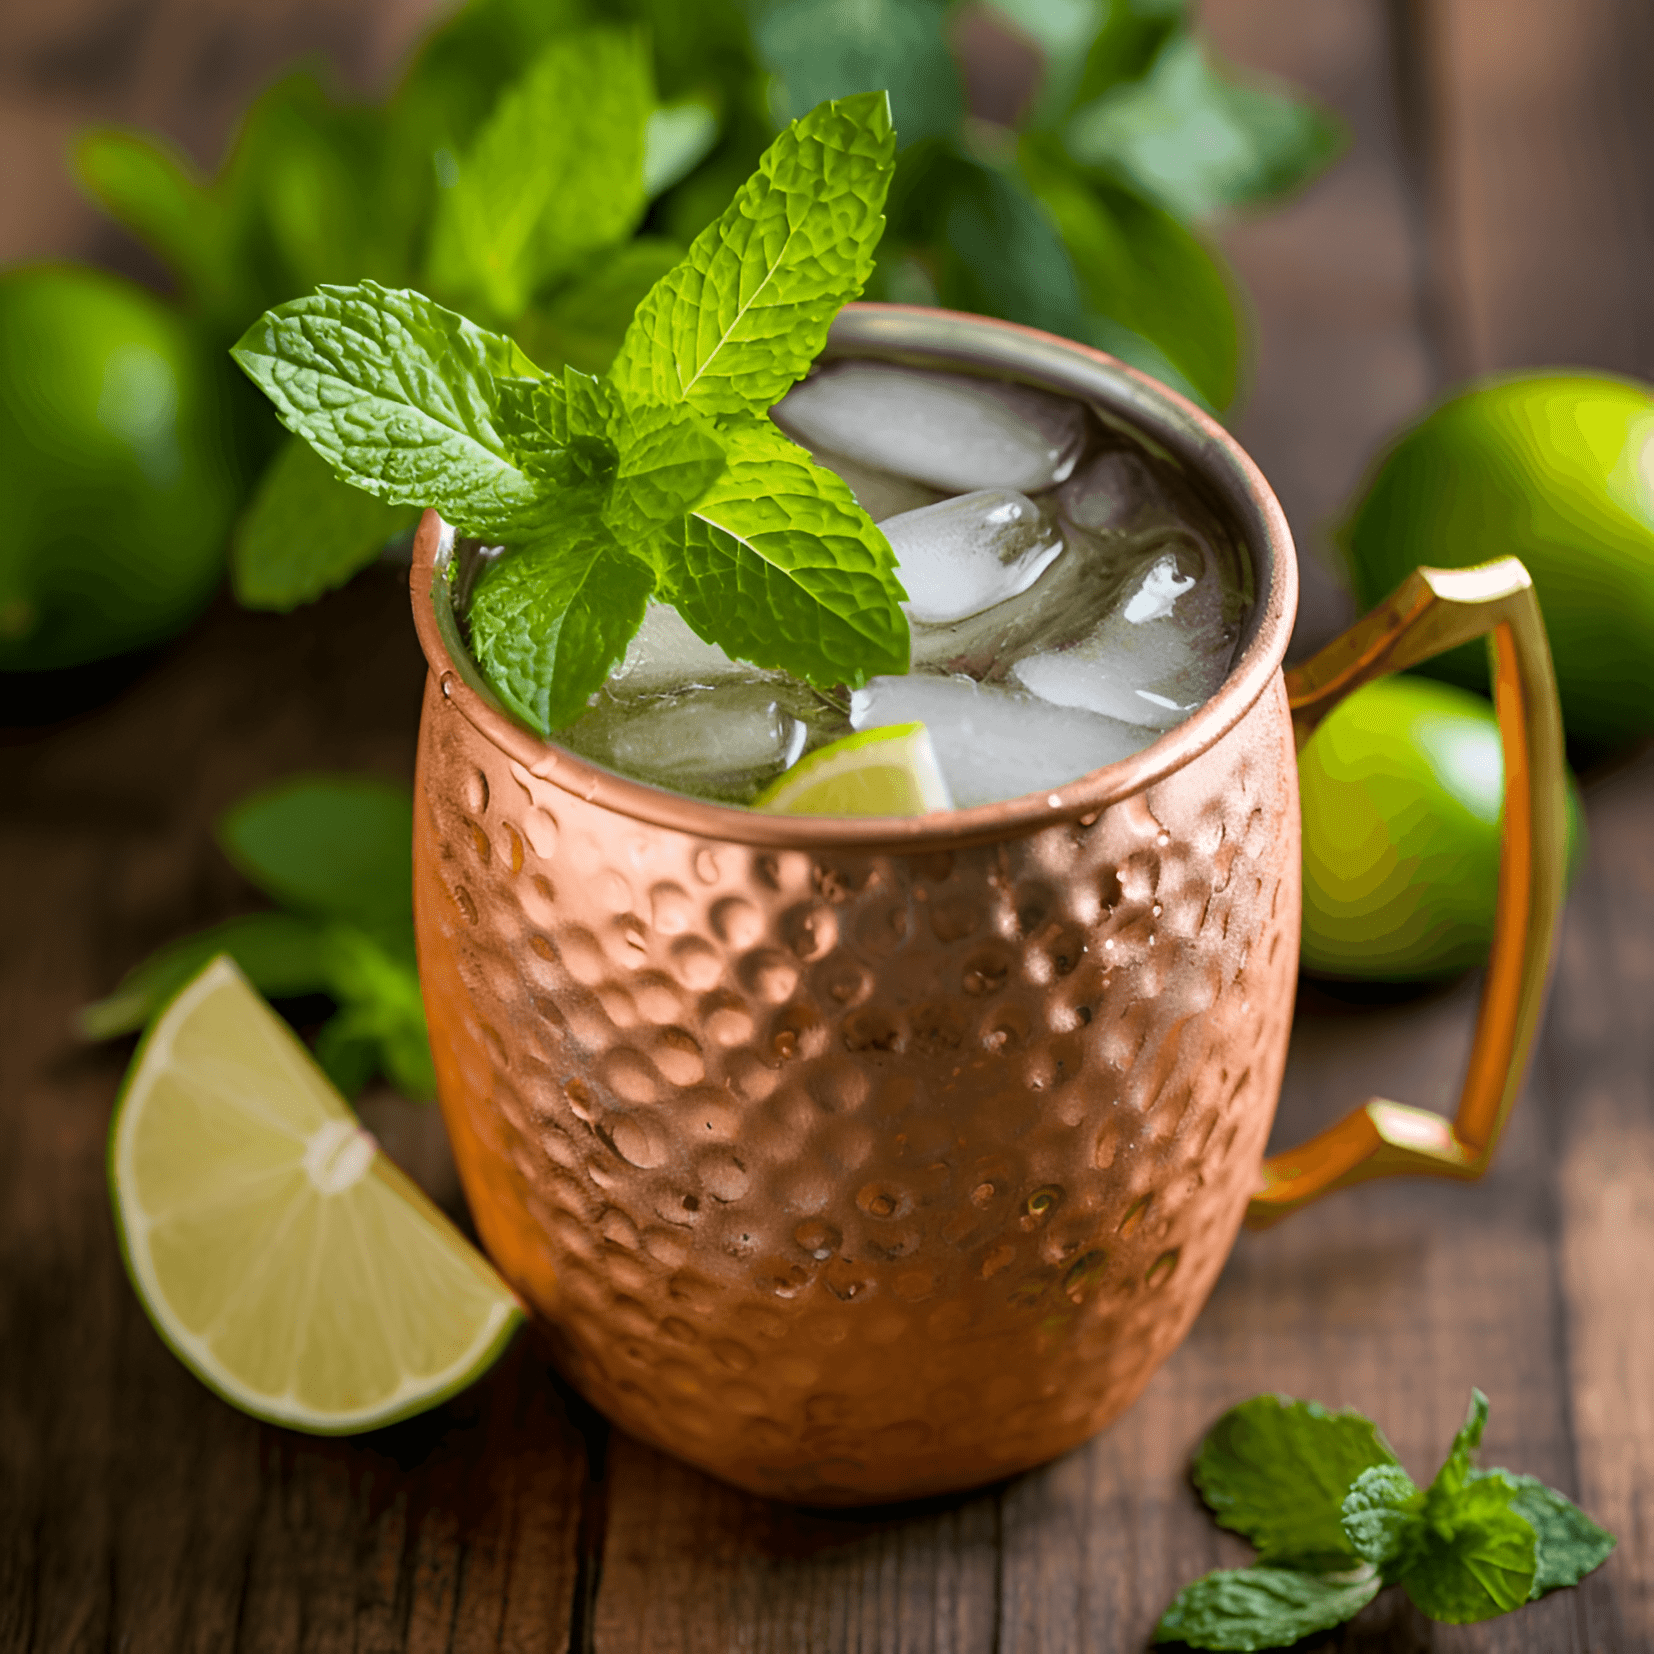 The Kentucky cocktail has a bold, refreshing taste with a perfect balance of sweet, spicy, and sour flavors. The bourbon provides a rich, smoky base, while the ginger beer adds a spicy kick. The lime juice brings a tangy, citrus note to the drink, making it a well-rounded and satisfying cocktail.